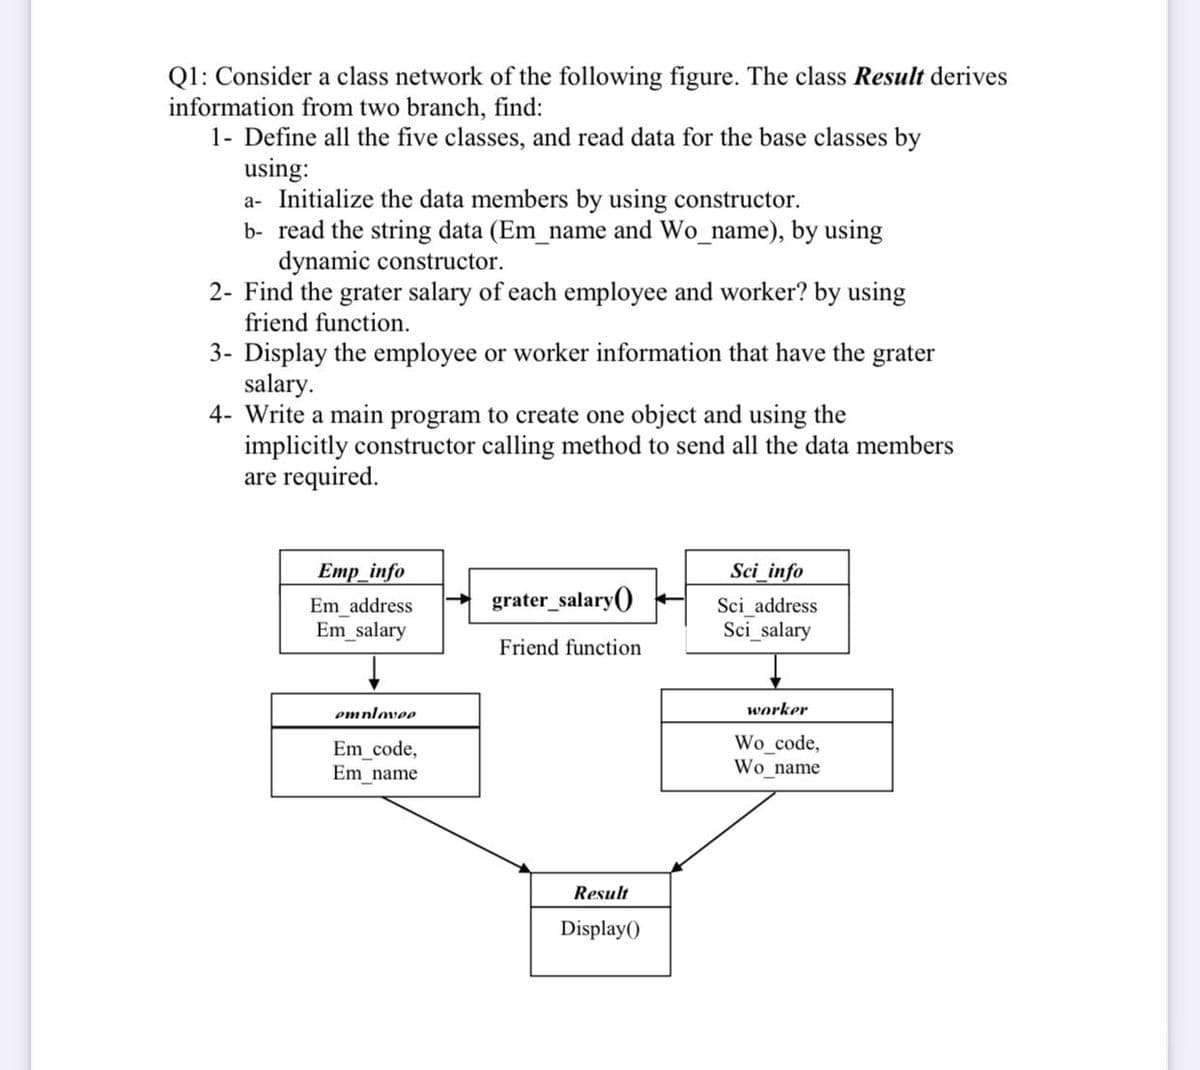 Q1: Consider a class network of the following figure. The class Result derives
information from two branch, find:
1- Define all the five classes, and read data for the base classes by
using:
a- Initialize the data members by using constructor.
b- read the string data (Em_name and Wo_name), by using
dynamic constructor.
2- Find the grater salary of each employee and worker? by using
friend function.
3- Display the employee or worker information that have the grater
salary.
4- Write a main program to create one object and using the
implicitly constructor calling method to send all the data members
are required.
Emp_info
Sci_info
grater_salary()
Em_address
Em_salary
Sci_address
Sci_salary
Friend function
omnlovee
worker
Em_code,
Em_name
Wo code,
Wo name
Result
Display()
